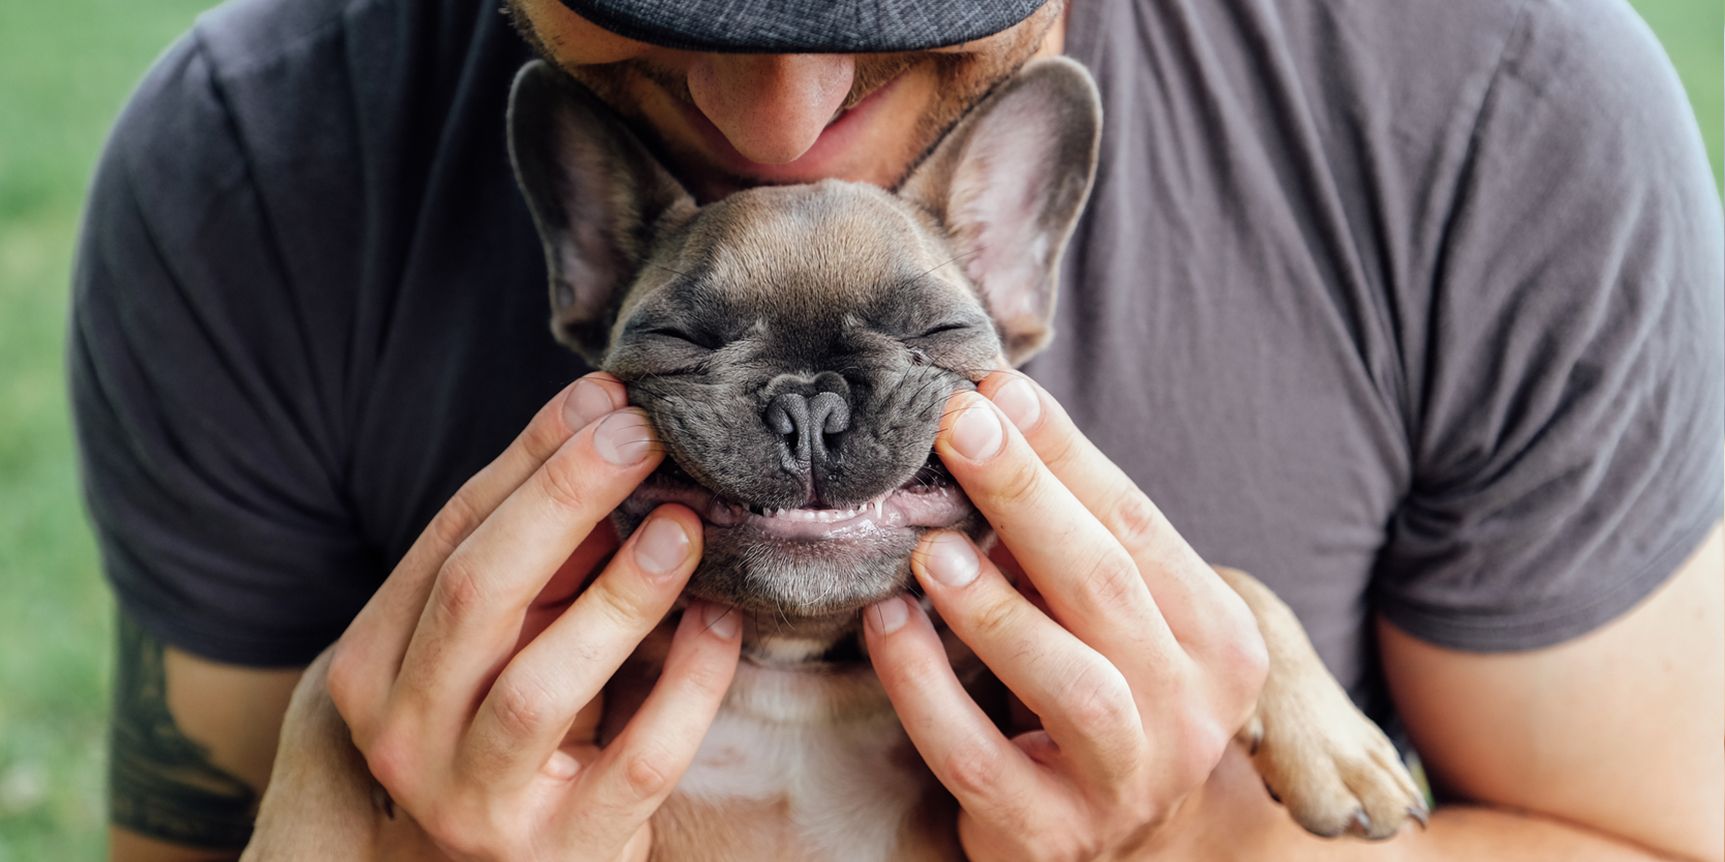 23 Top Gifts for Dog Lovers & Dogs for Any Occasion - Farm Fit Living